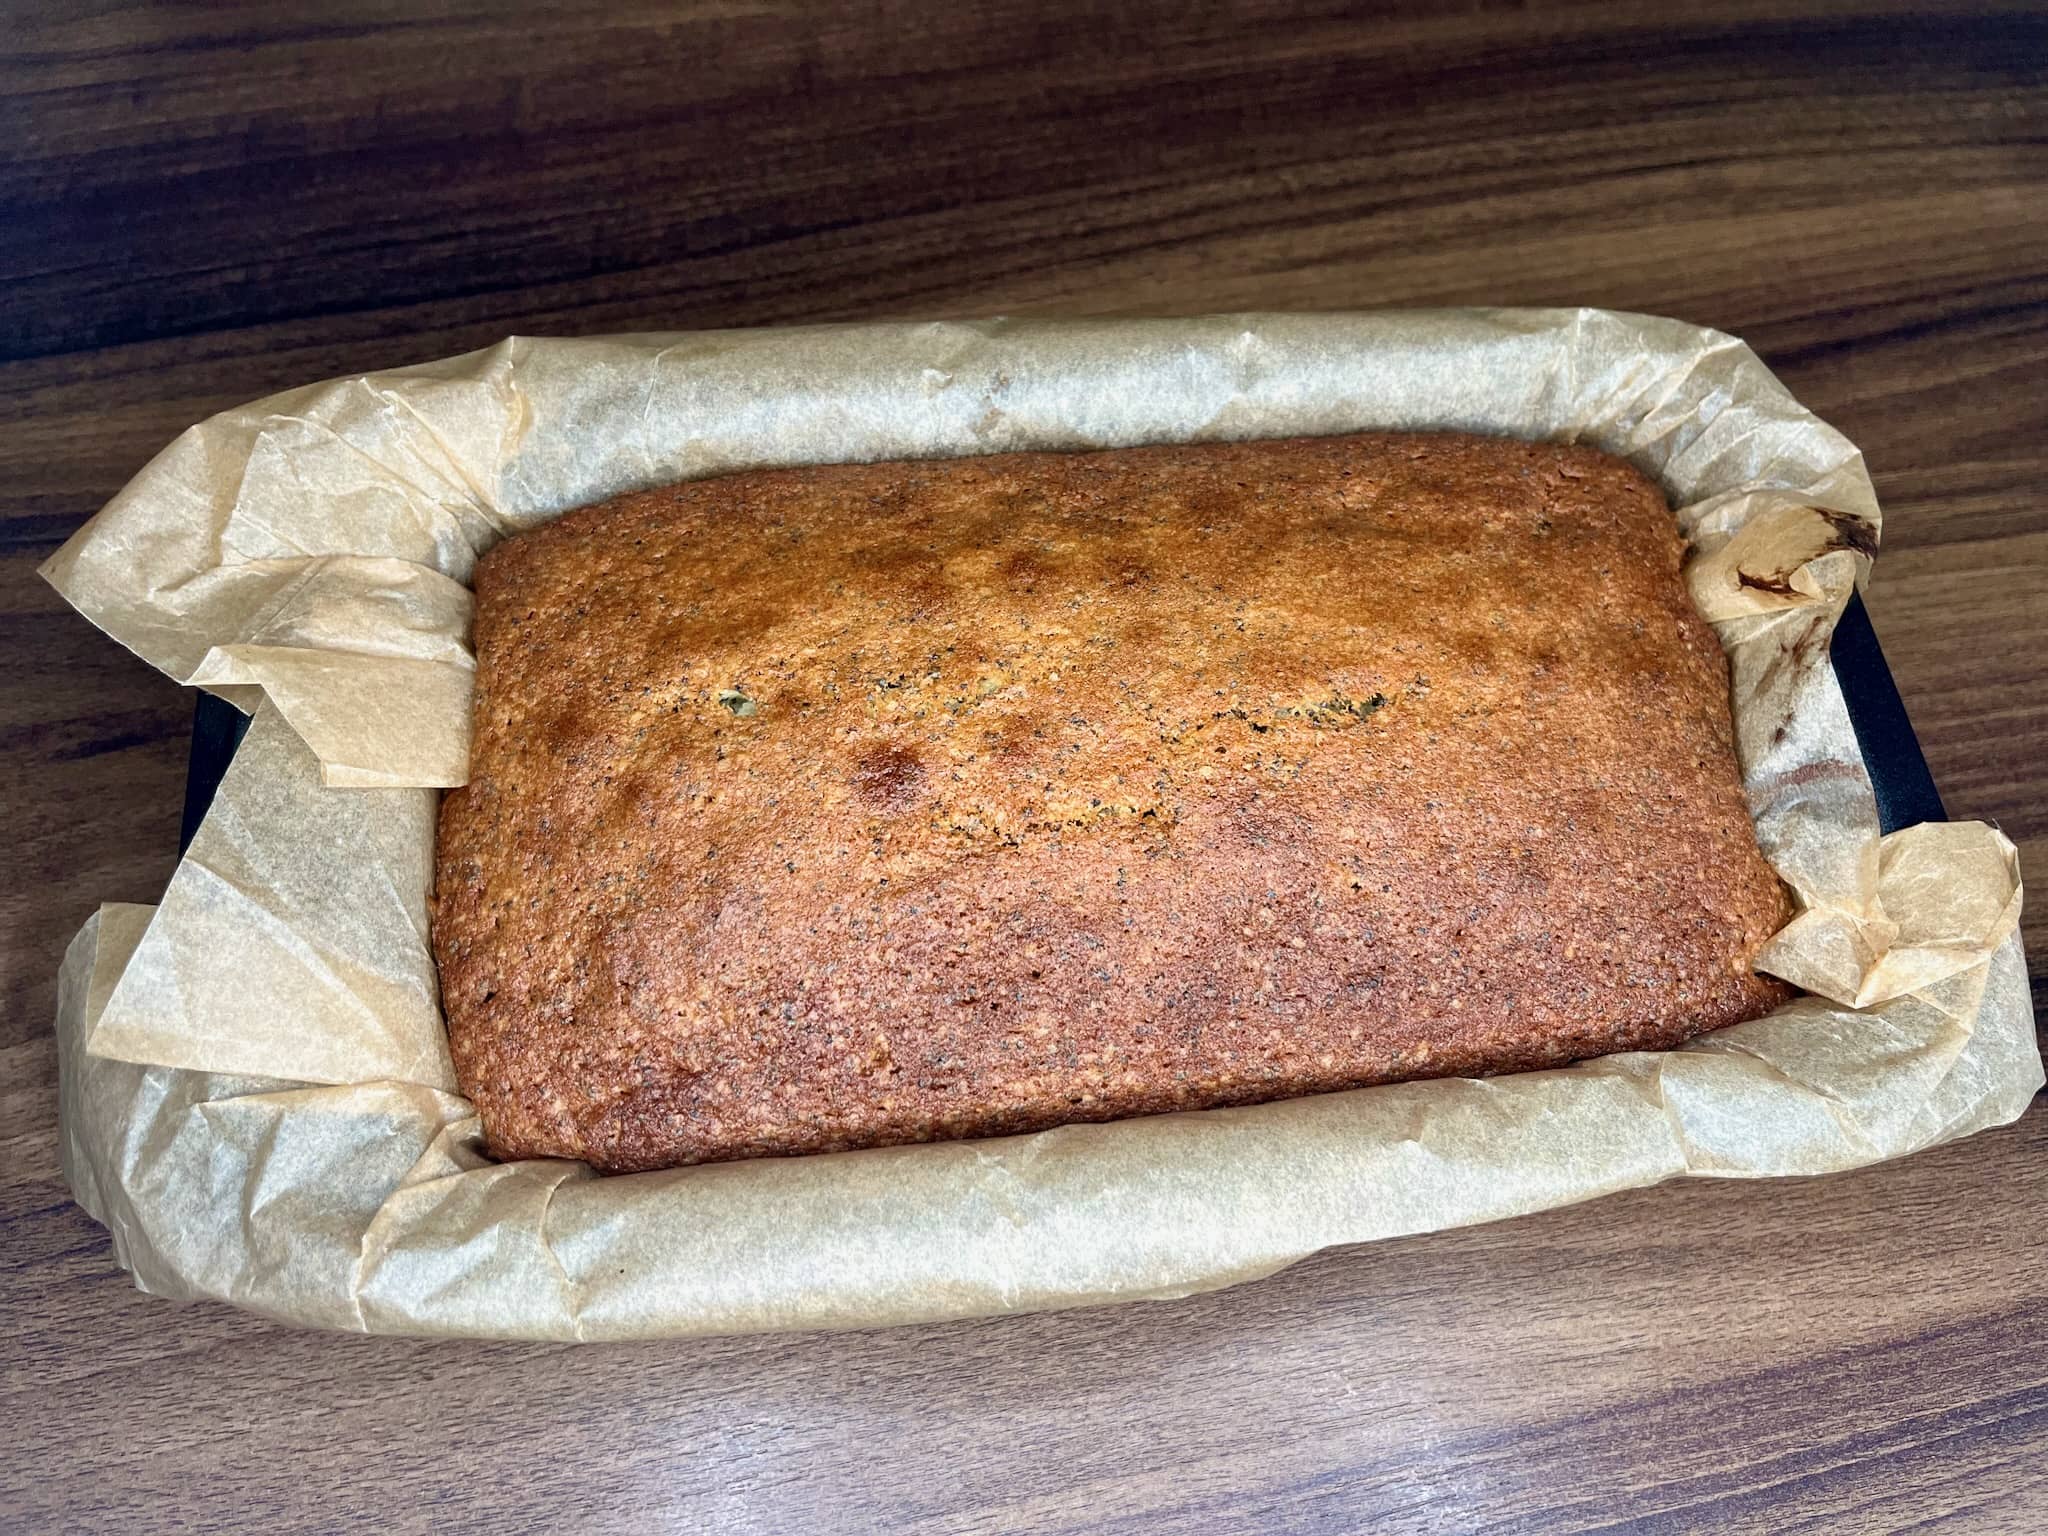 A freshly baked poppy seed loaf cake, still warm from the oven